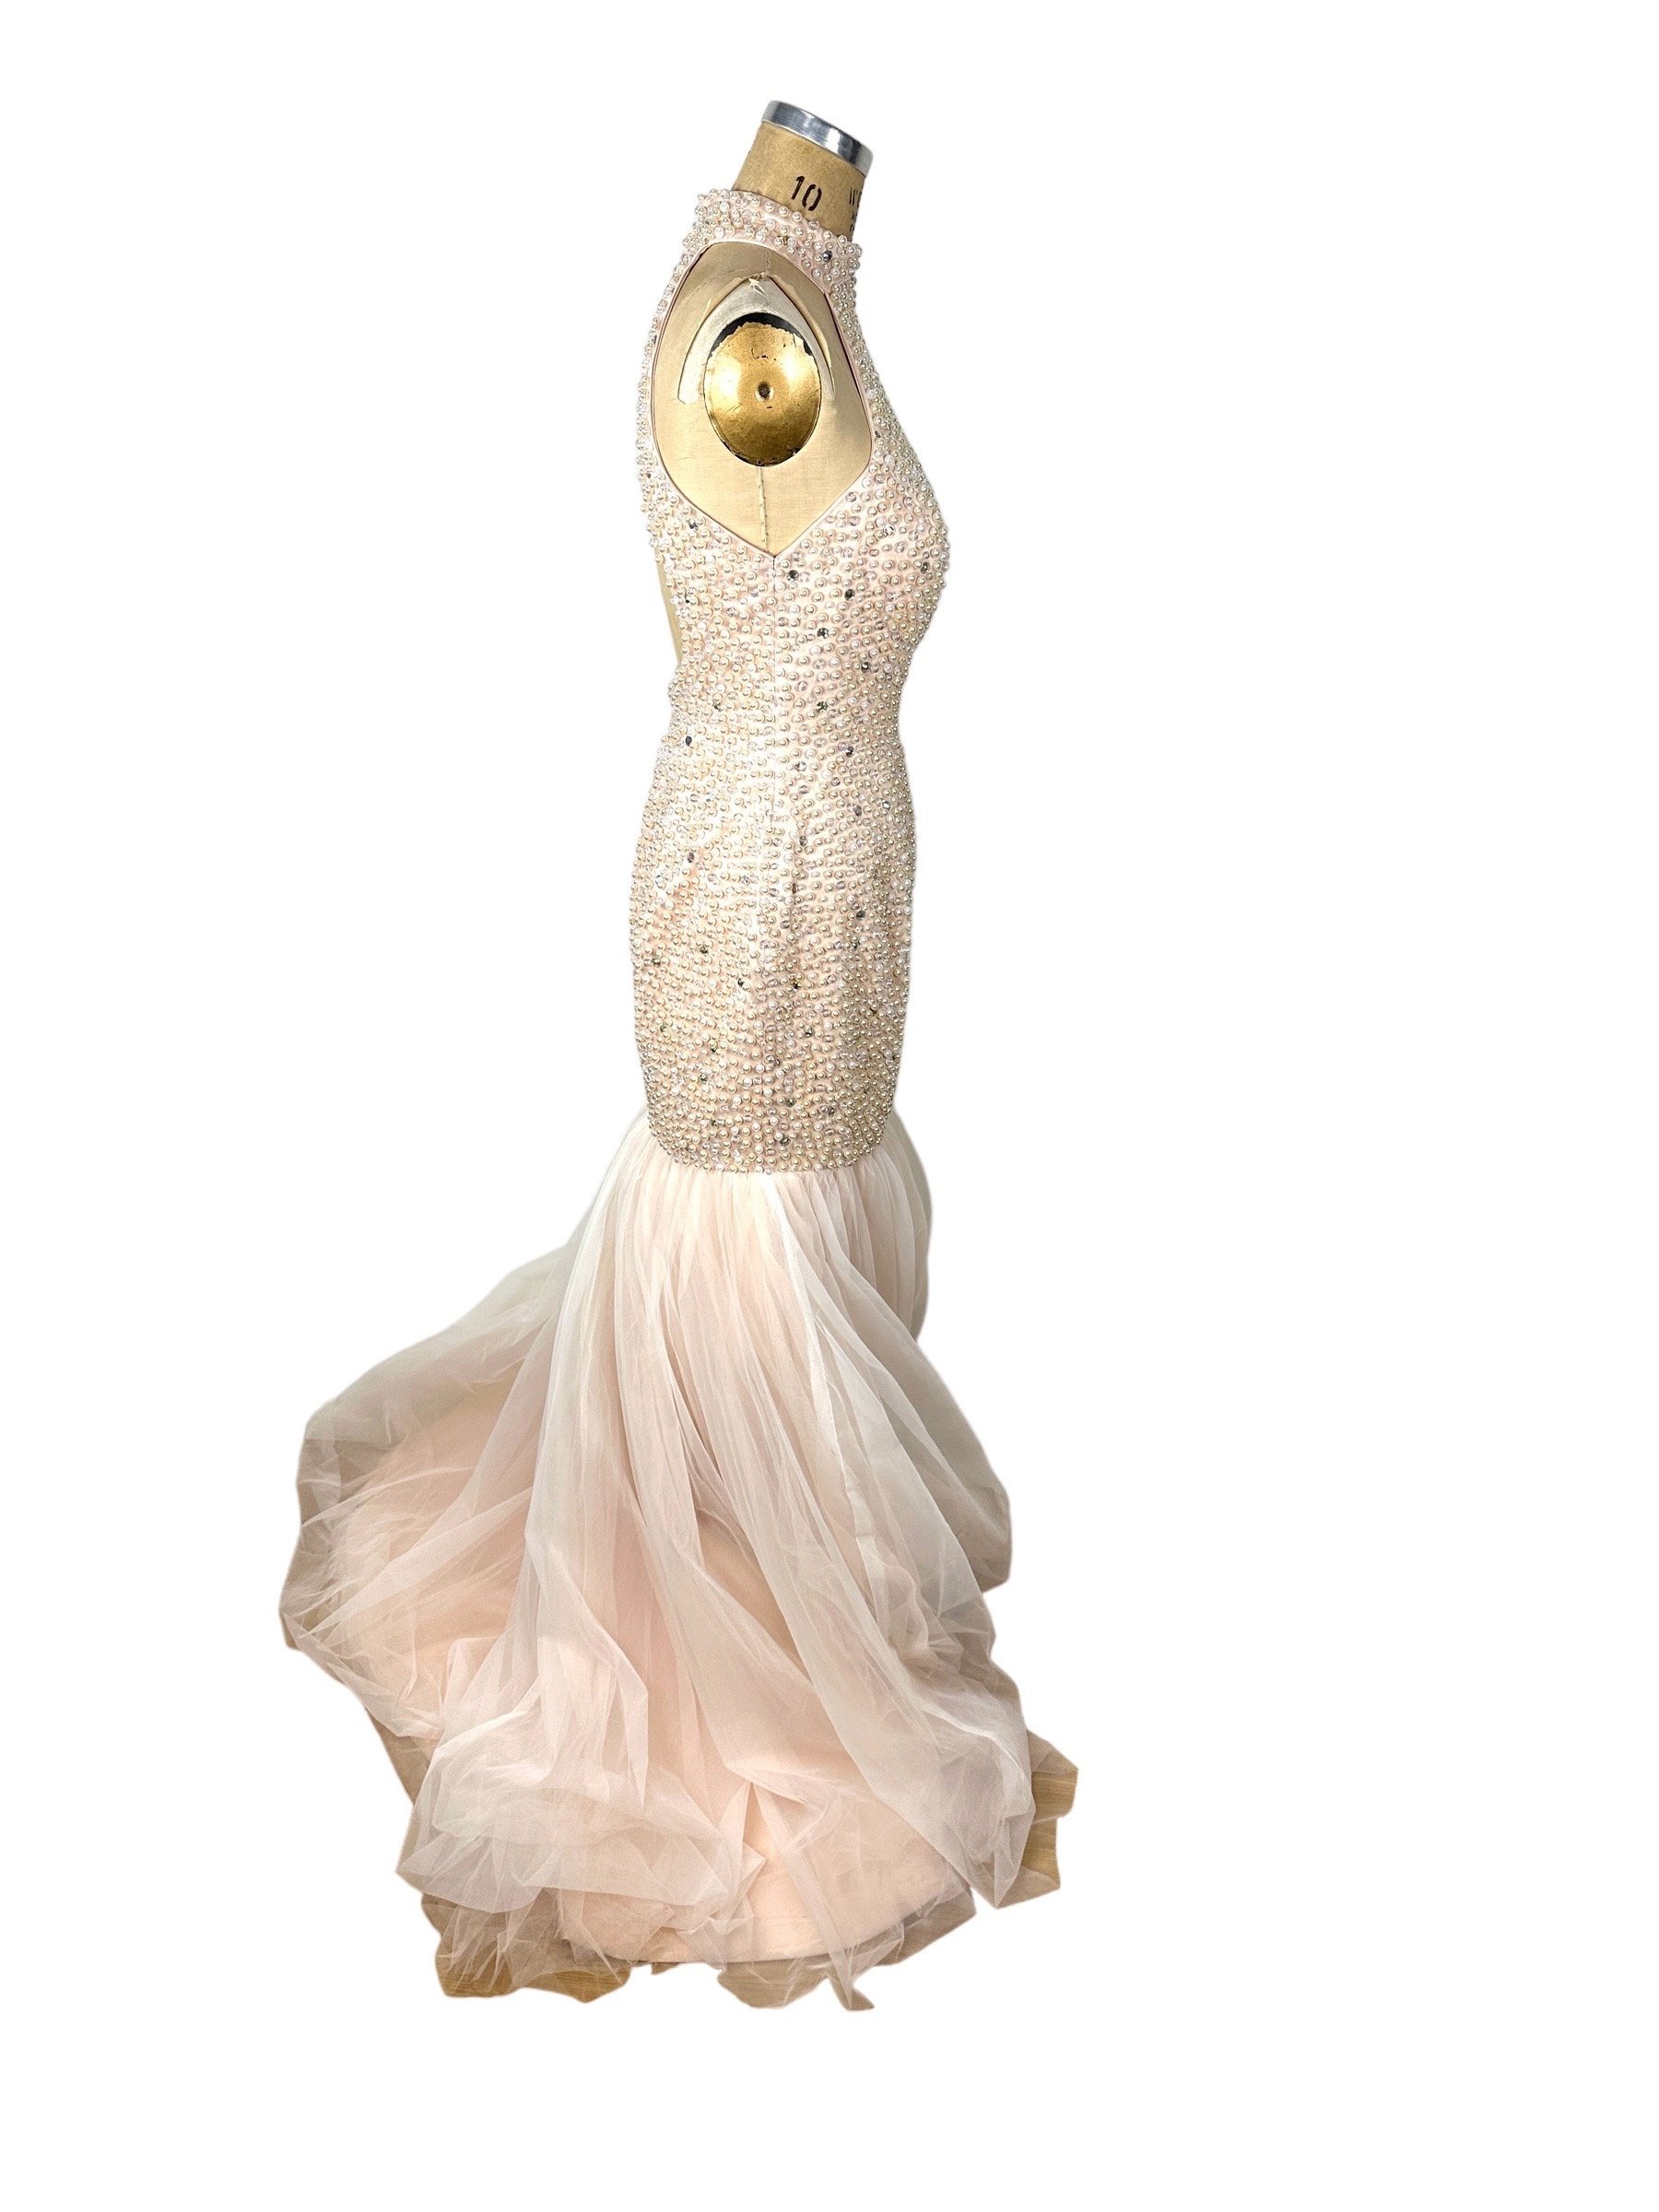 1980s Halter Gown Blush Pink With Pearls and Rhinestones Mermaid Style Size  M/L 